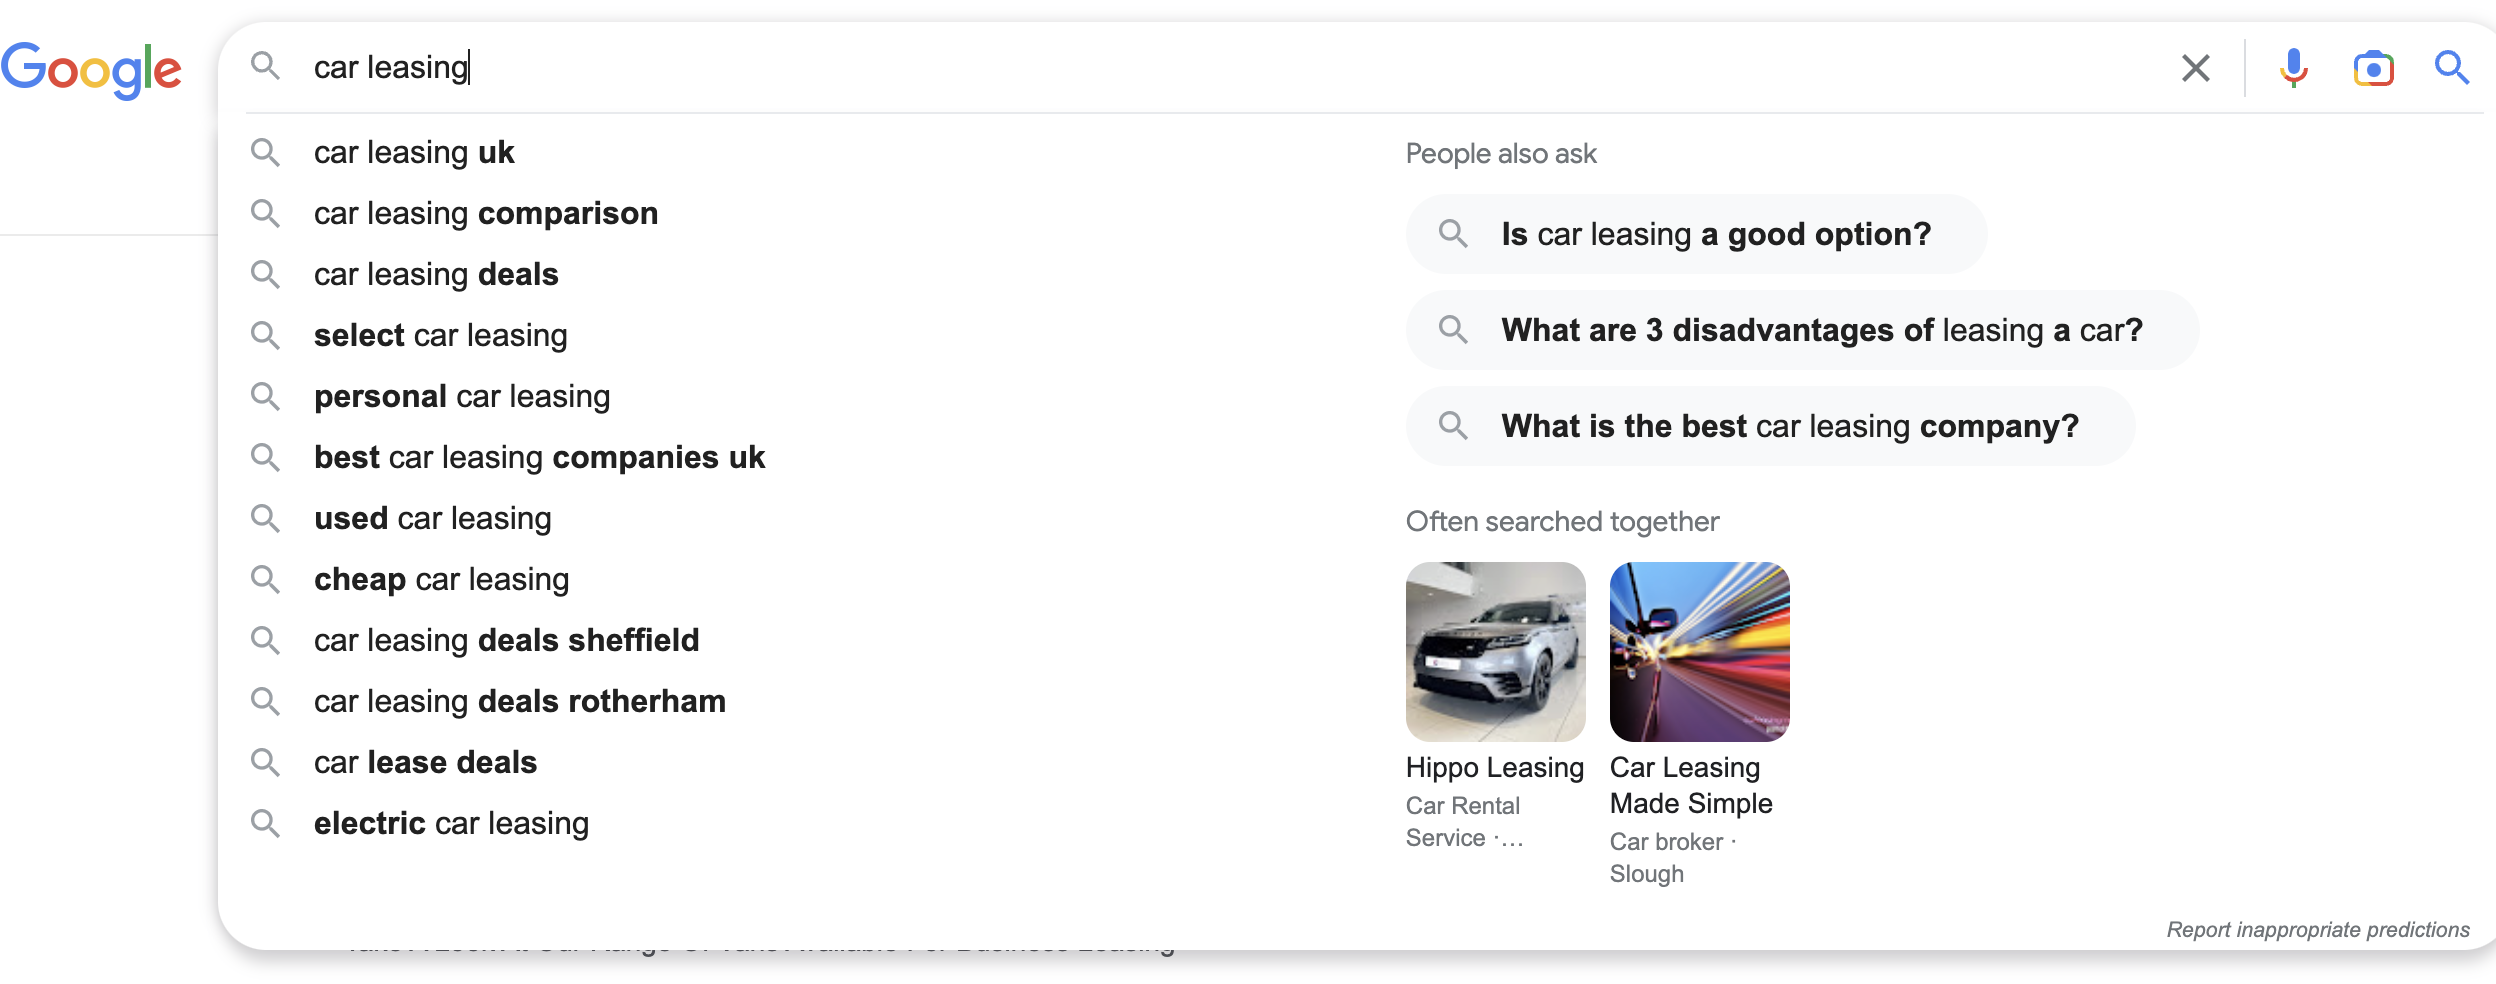 Screenshot of a car leasing search engine results page with two companies featured in the "Often searched together" panel.